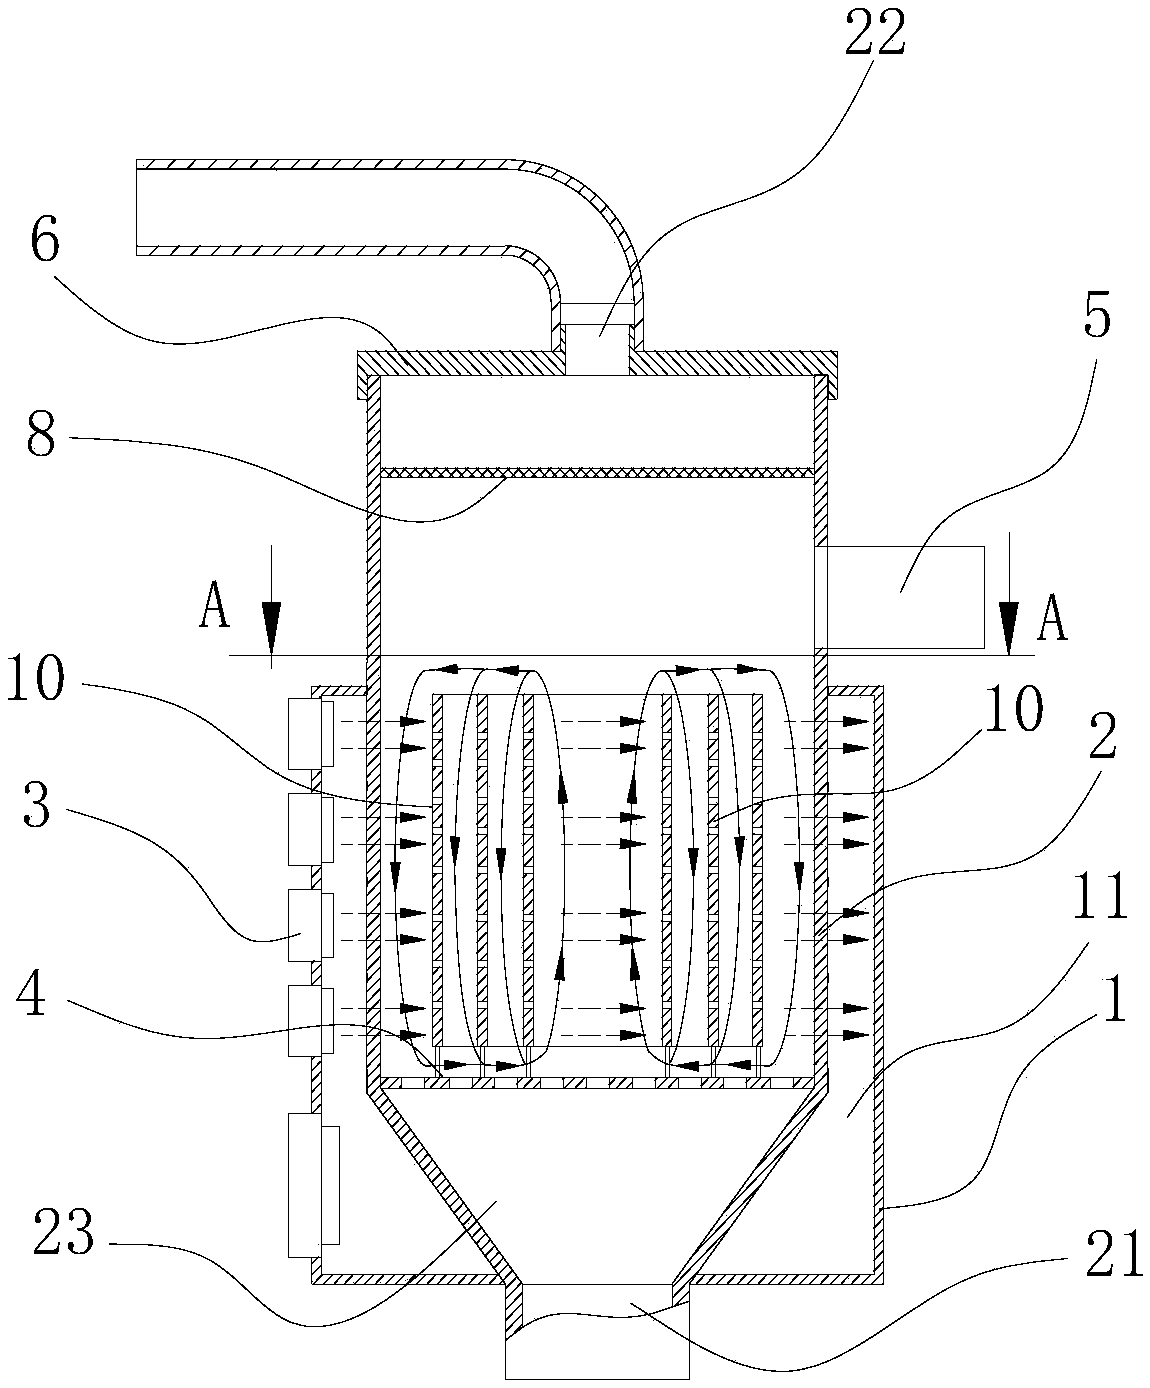 Microwave processing multi-phase fluidized bed reactor and process for treating phosphogypsum